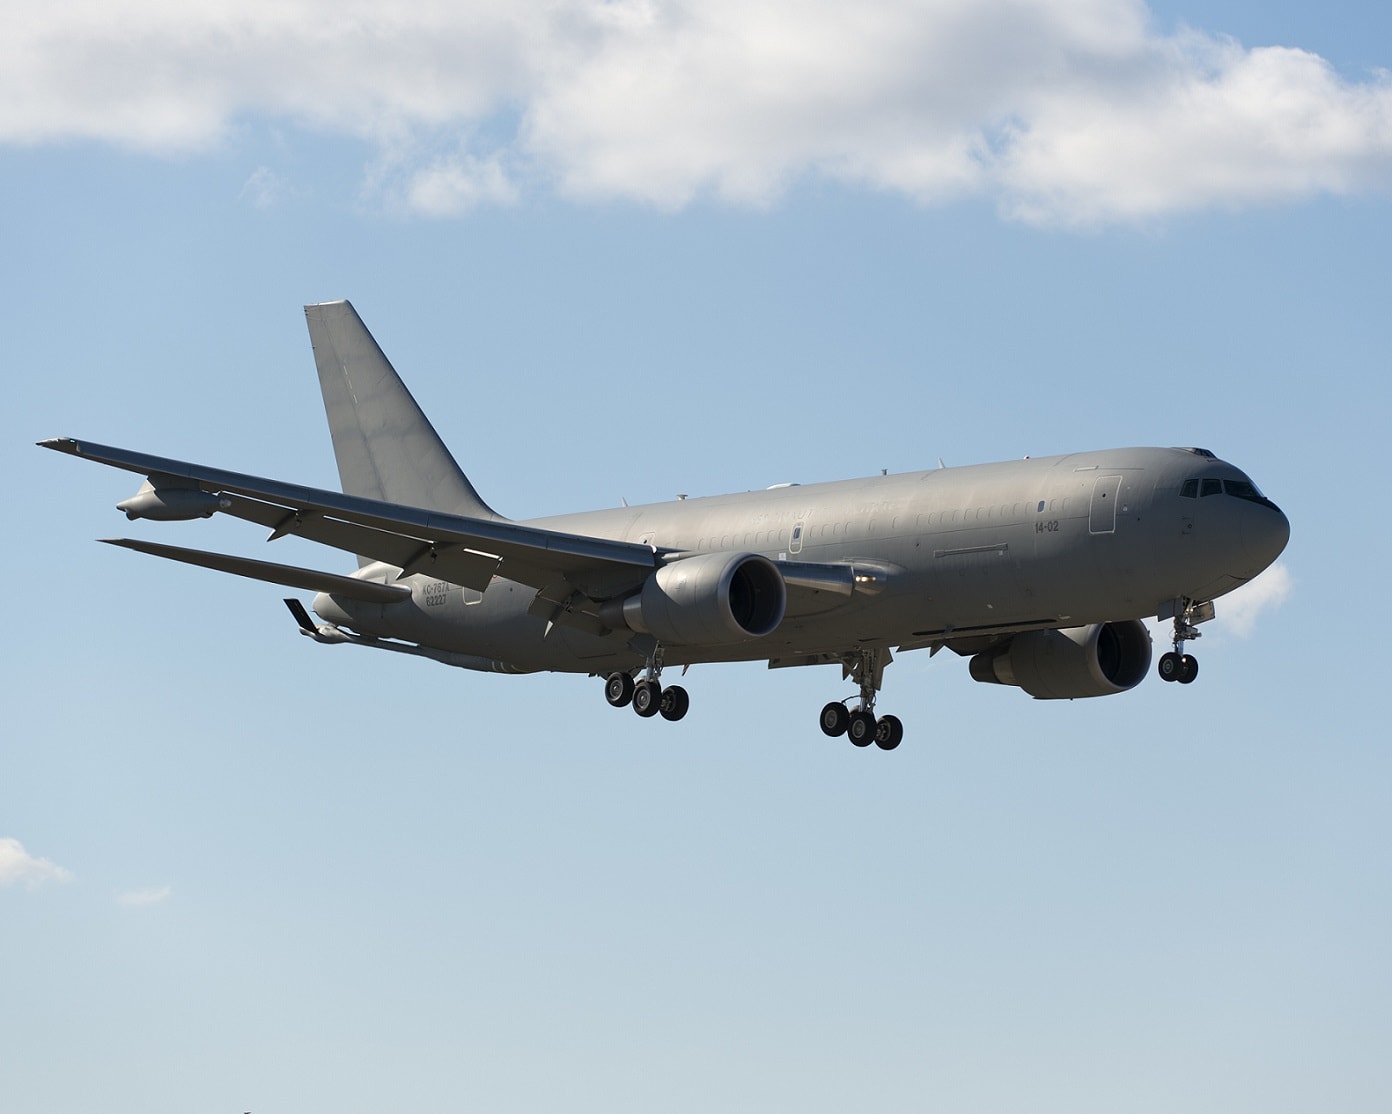 Boeing announces continue support to Italian KC-767 tankers